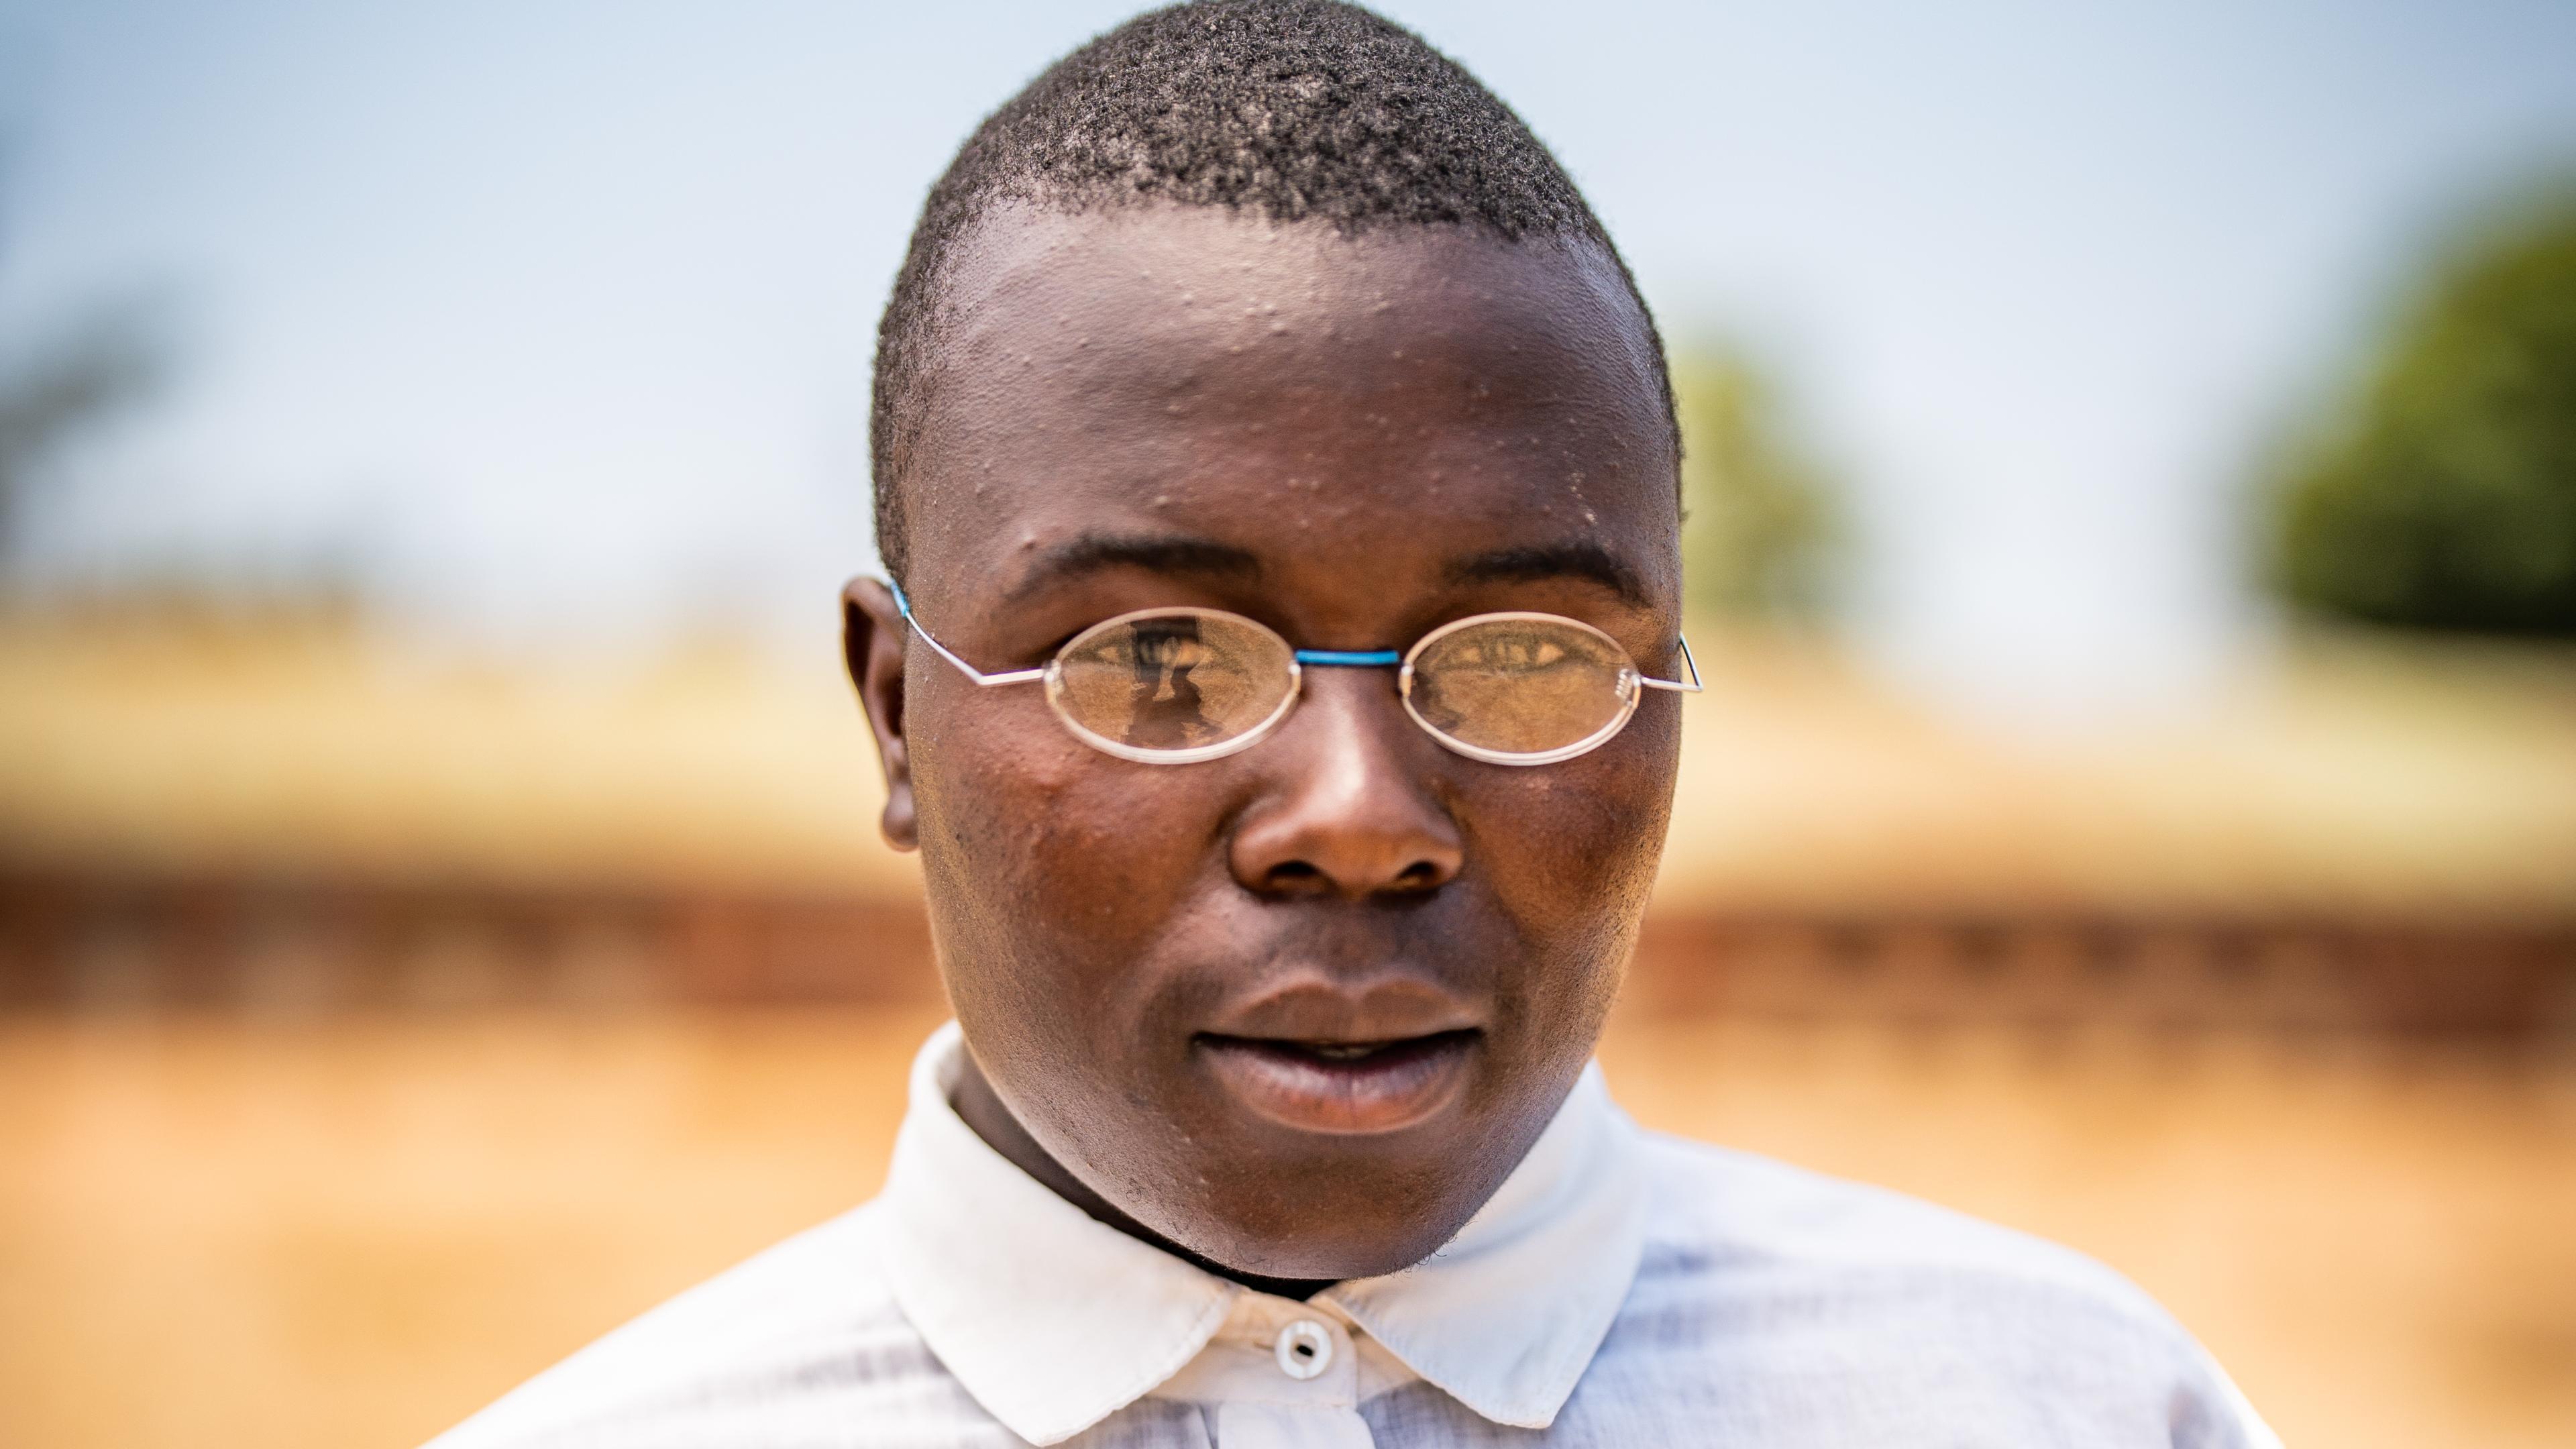 Malawian boy with glasses and shirt